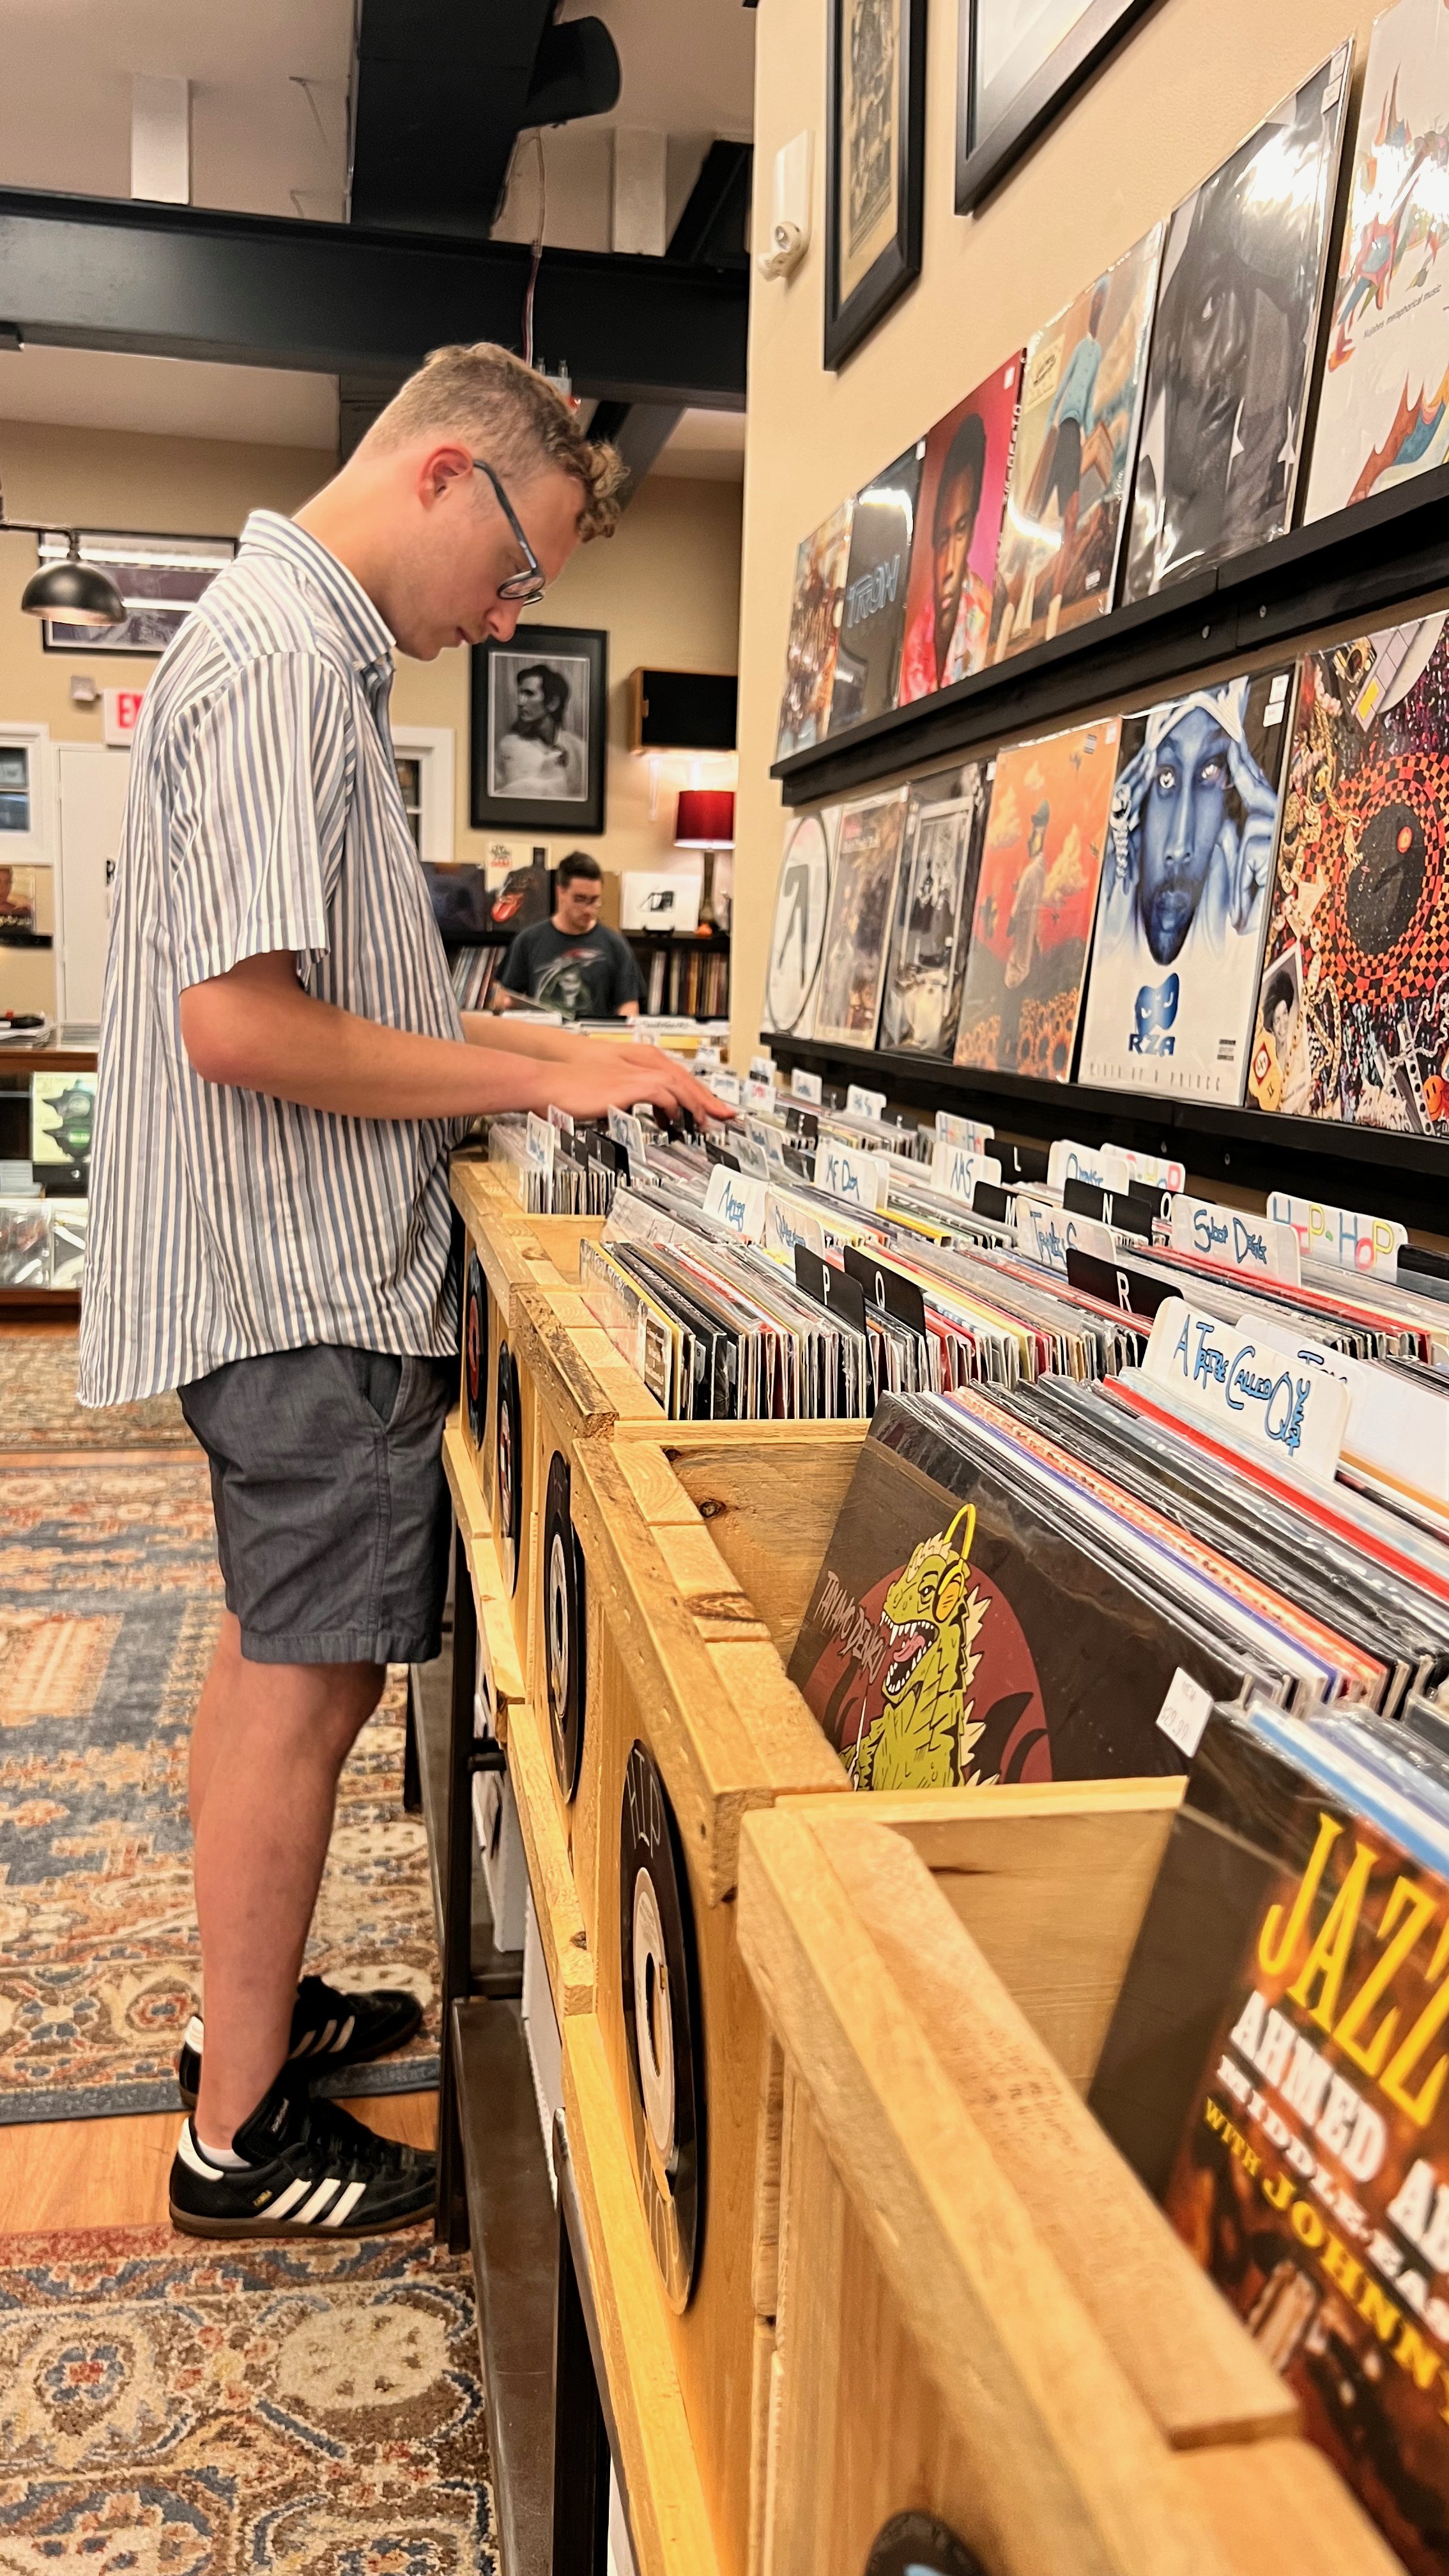 James at the record store